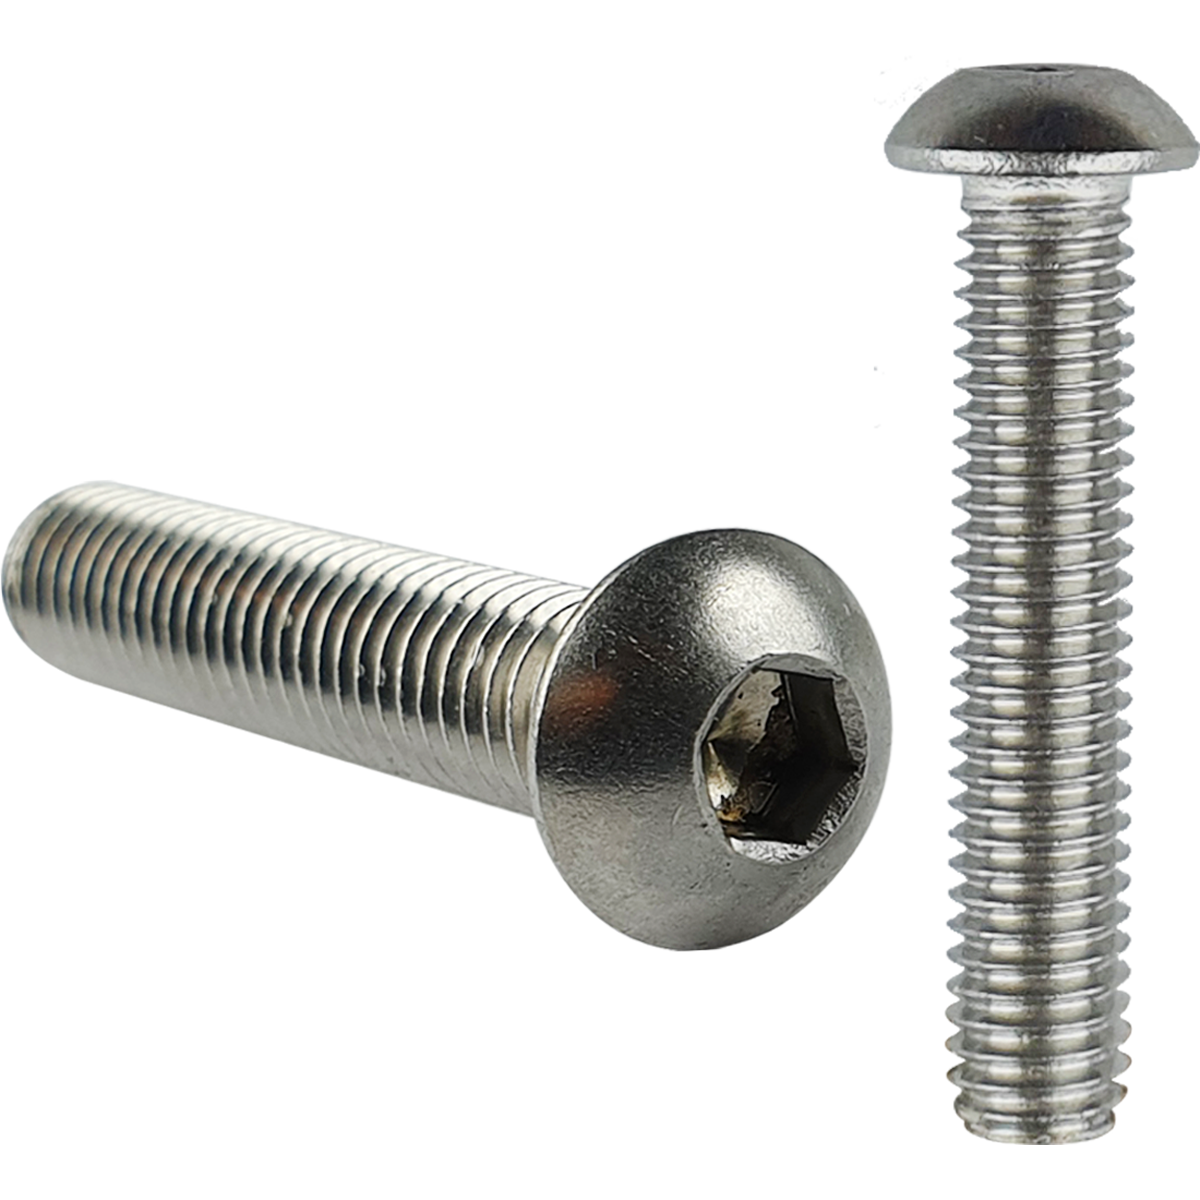 Highly corrosion resistant A4 stainless steel button head machine screws with a hex recess for use with Allen keys.